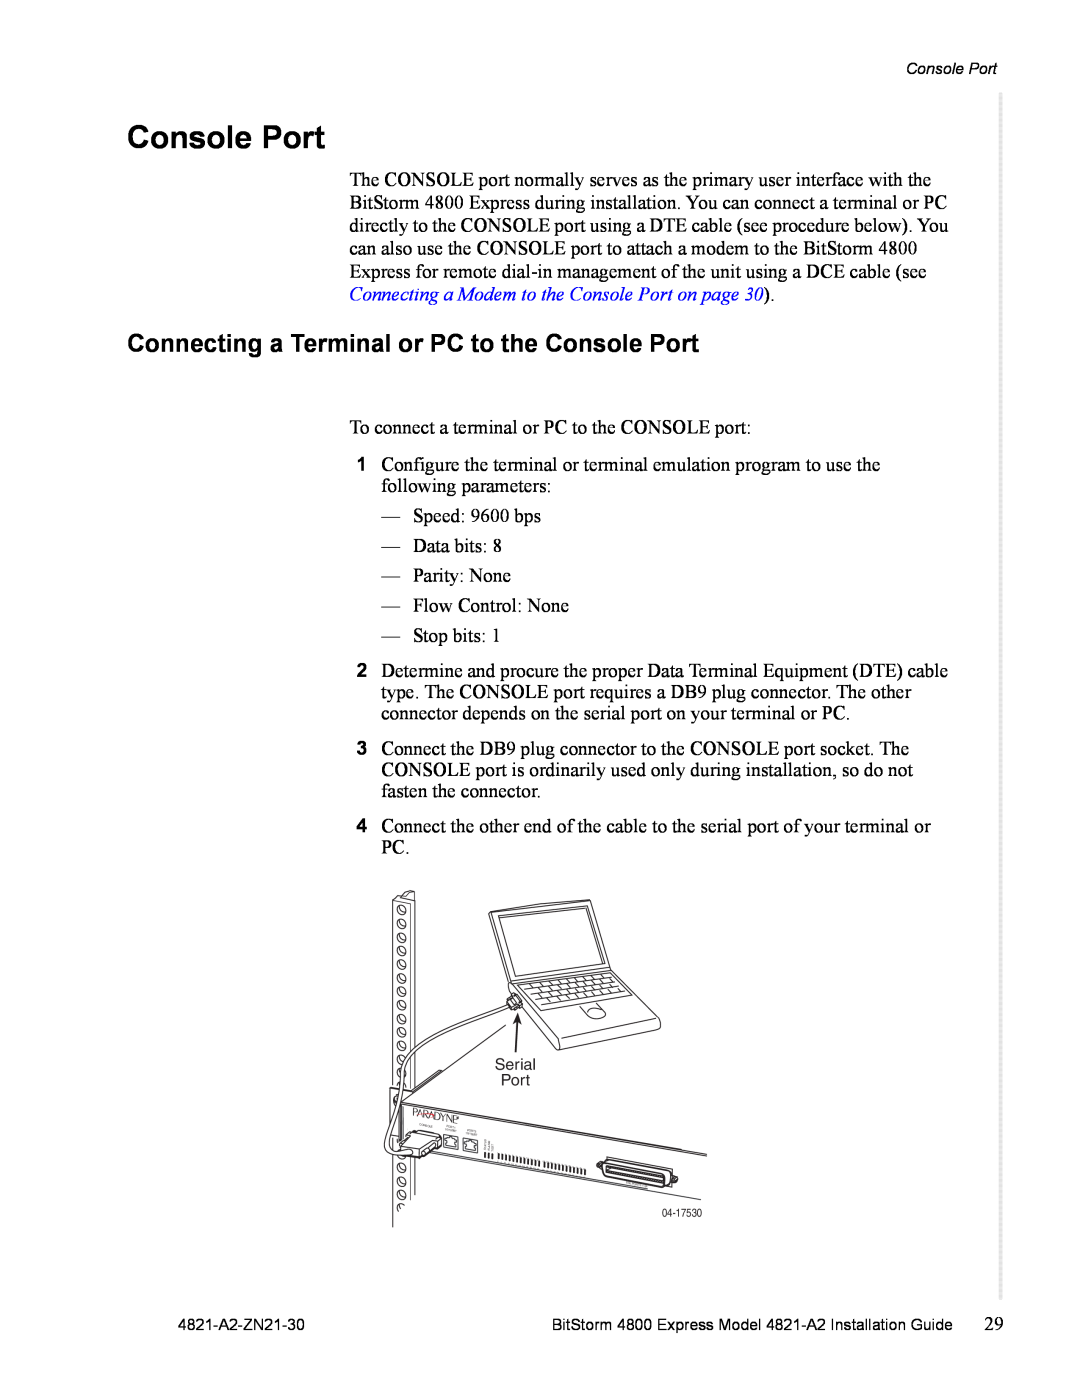 Zhone Technologies 4821-A2 manual Connecting a Terminal or PC to the Console Port 